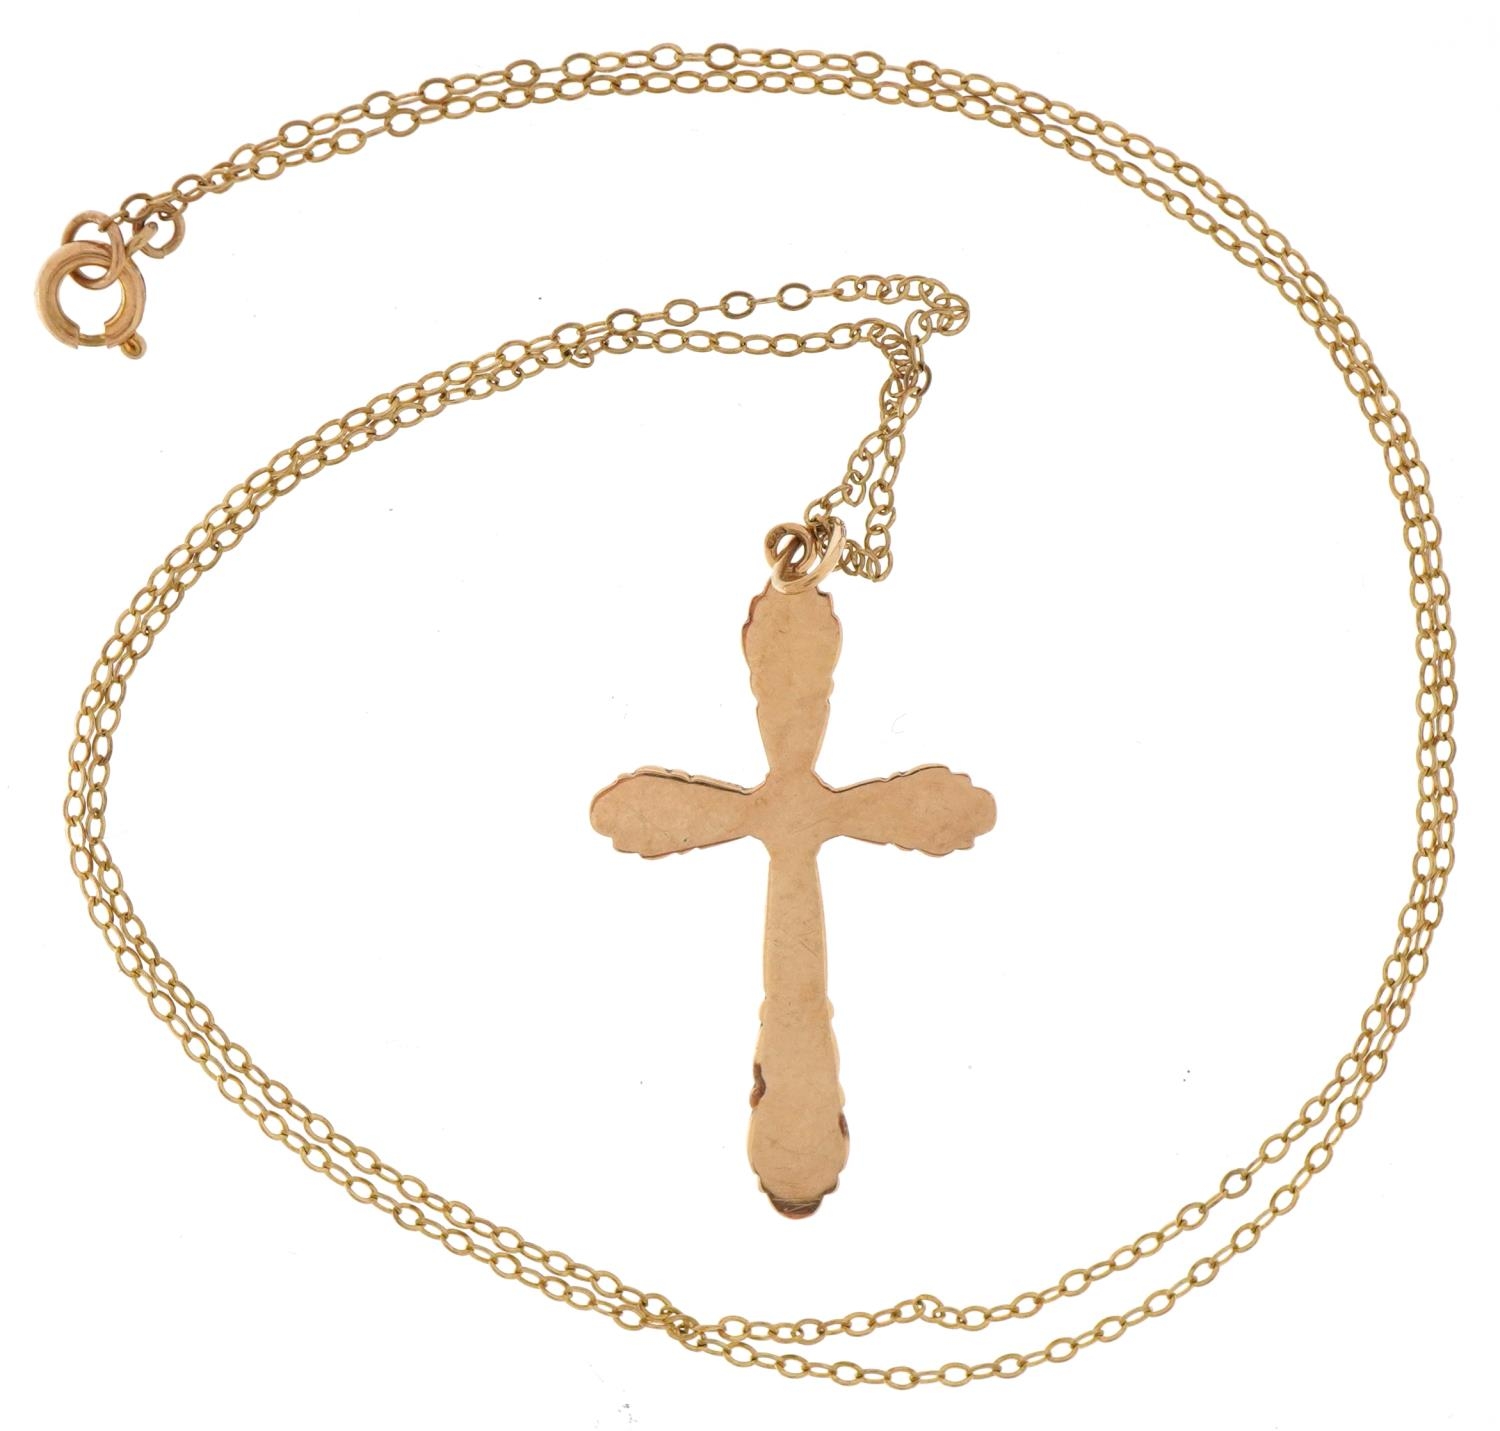 9ct gold cross pendant on a 9ct gold necklace, 3.5cm high and 48cm in length, total 1.7g - Image 3 of 3